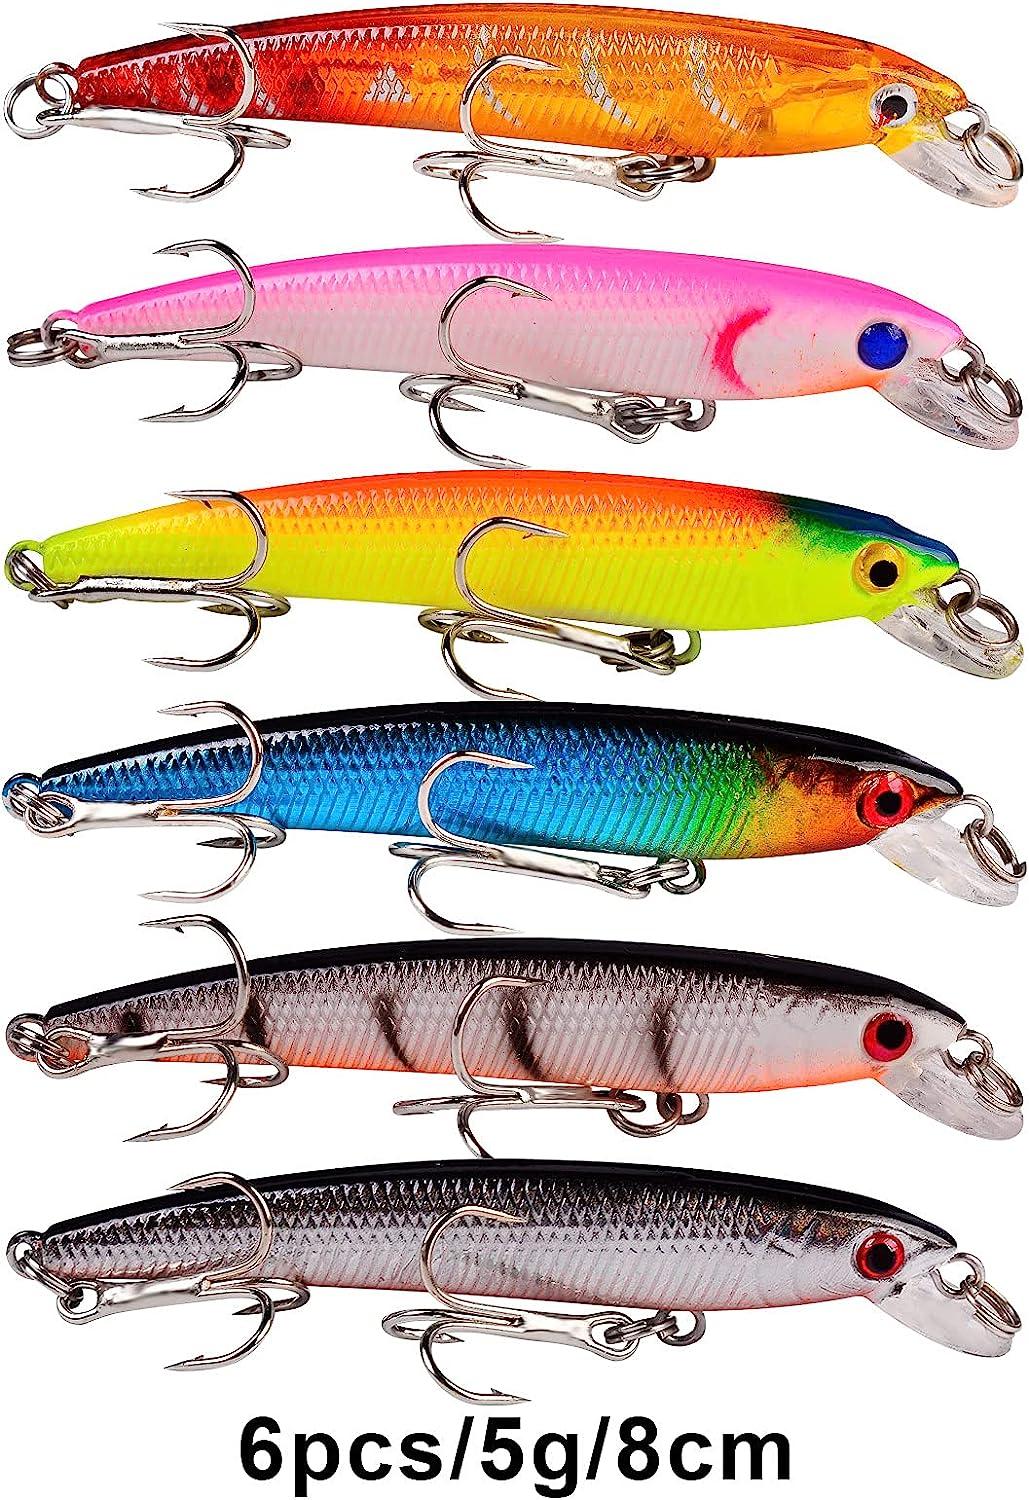 BAIKALBASS Bass Fishing Lures Kit Set Topwater Hard Baits Minnow Crankbait  Pencil VIB Swimbait for Bass Pike Fit Saltwater and Freshwater